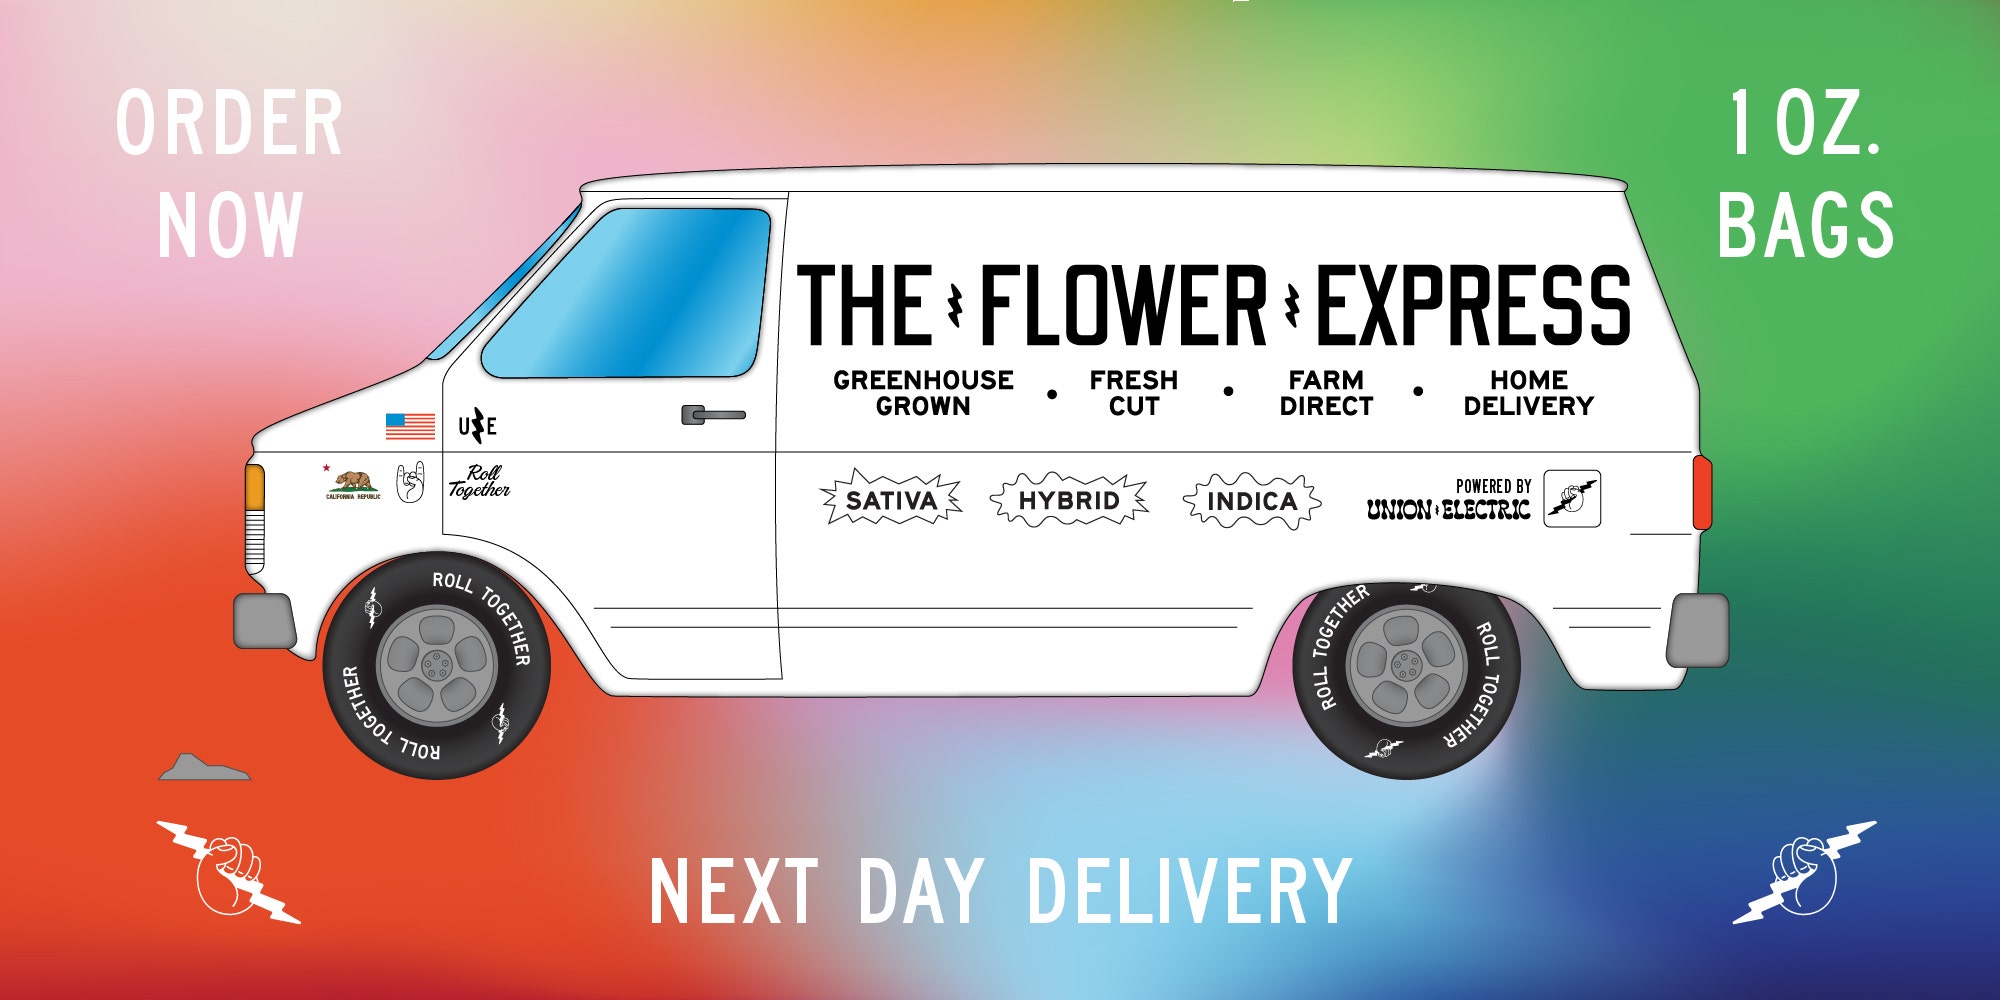 Our Experience Launching A Direct-To-Consumer Flower Brand